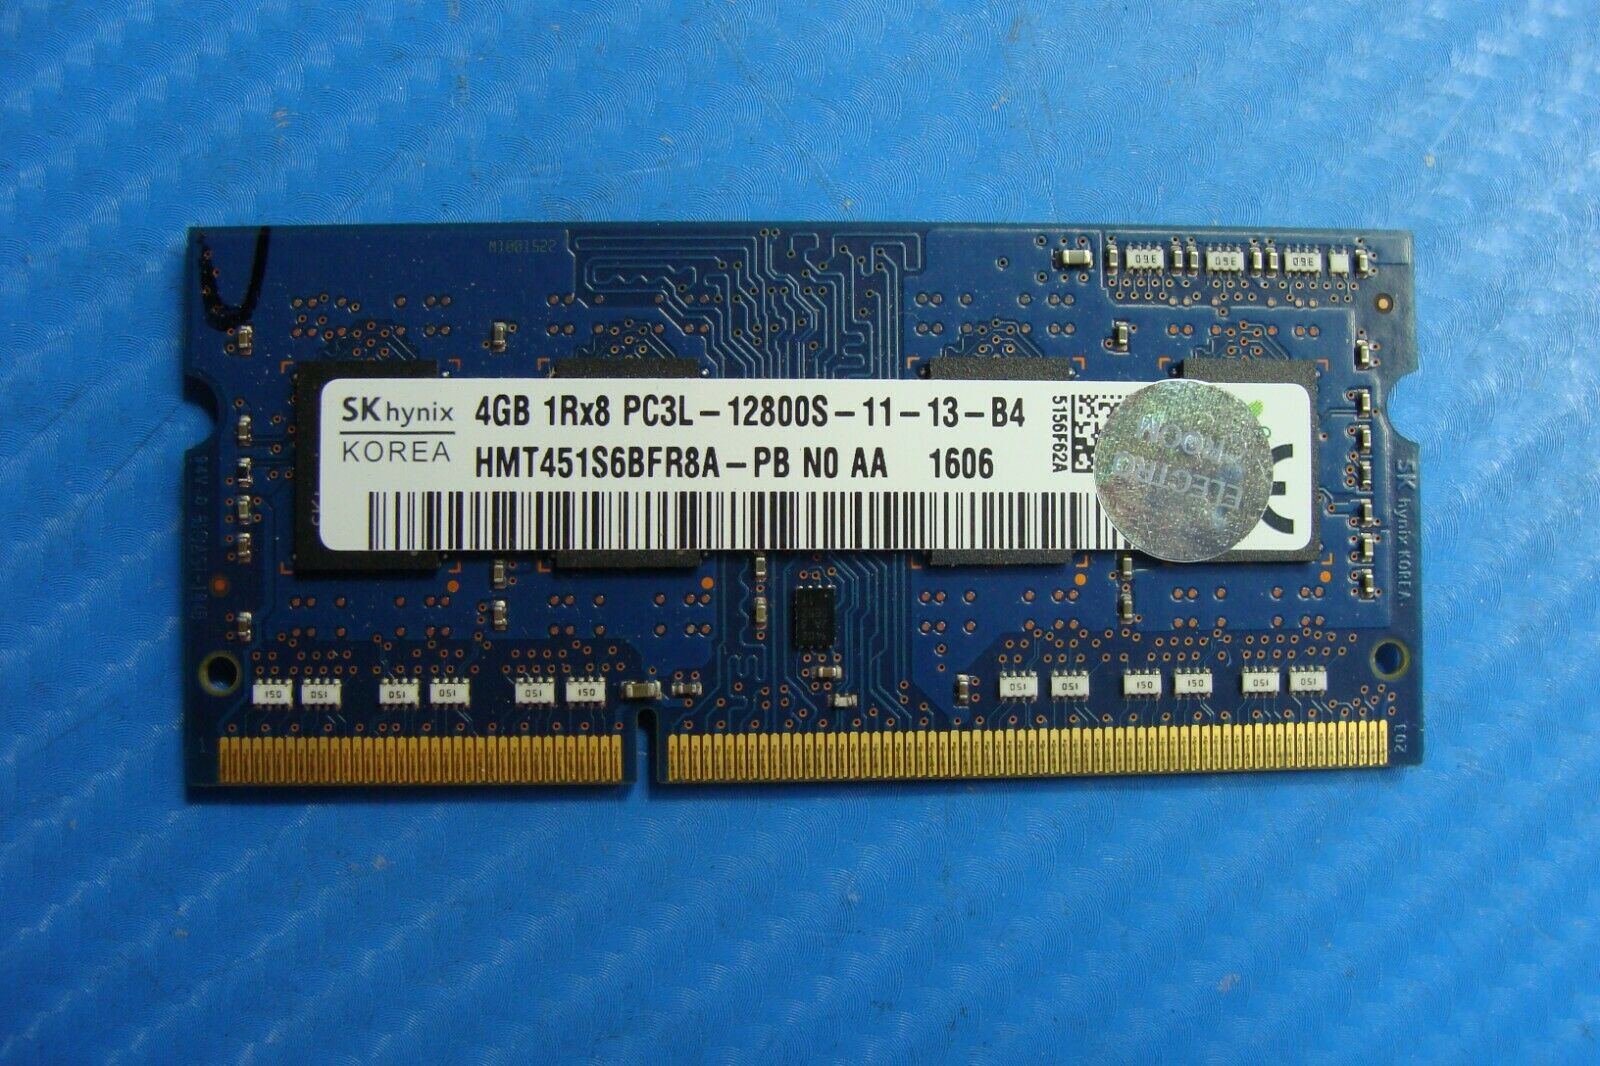 Dell Inspiron 15.6" 15 5558 SKhynix SO-DIMM Memory Ram 4GB pc3l-12800s - Laptop Parts - Buy Authentic Computer Parts - Top Seller Ebay